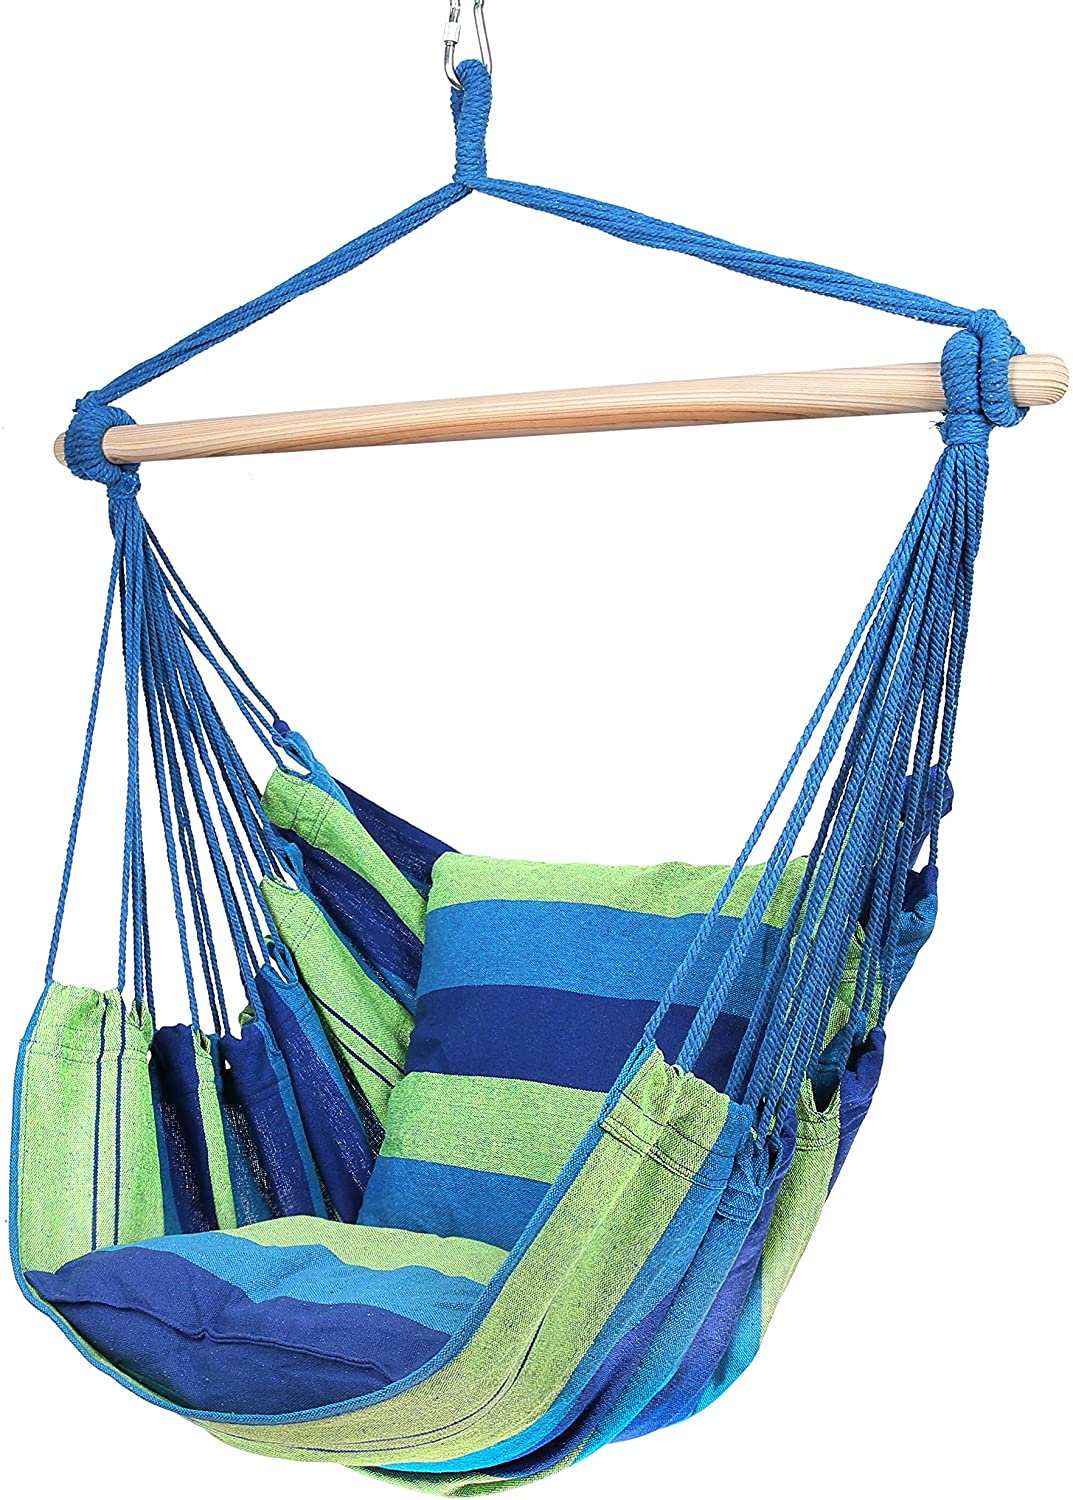 Update: Back Again at $25.19!!! – Blissun Hanging Hammock Chair with